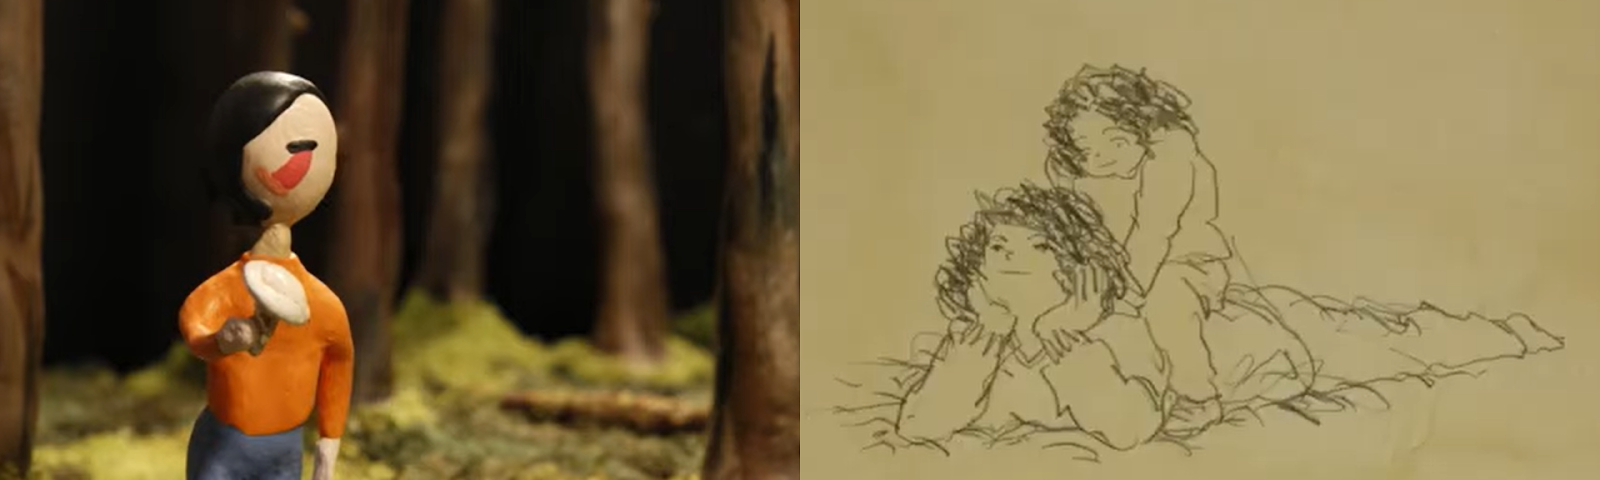 A compound image made of two film stills. On the left from IN THE SHADOW OF THE PINES by Anne Koizumi is a claymation Asian character wearing an orange shirt and blue pants, holding a mushroom standing in a pine forest. On the right from TIGER AND OX by Seunghee Kim is a pencil sketch of a daughter figure sitting on her mother’s back. Her mother is lying down on the floor with her face propped up in her hands.